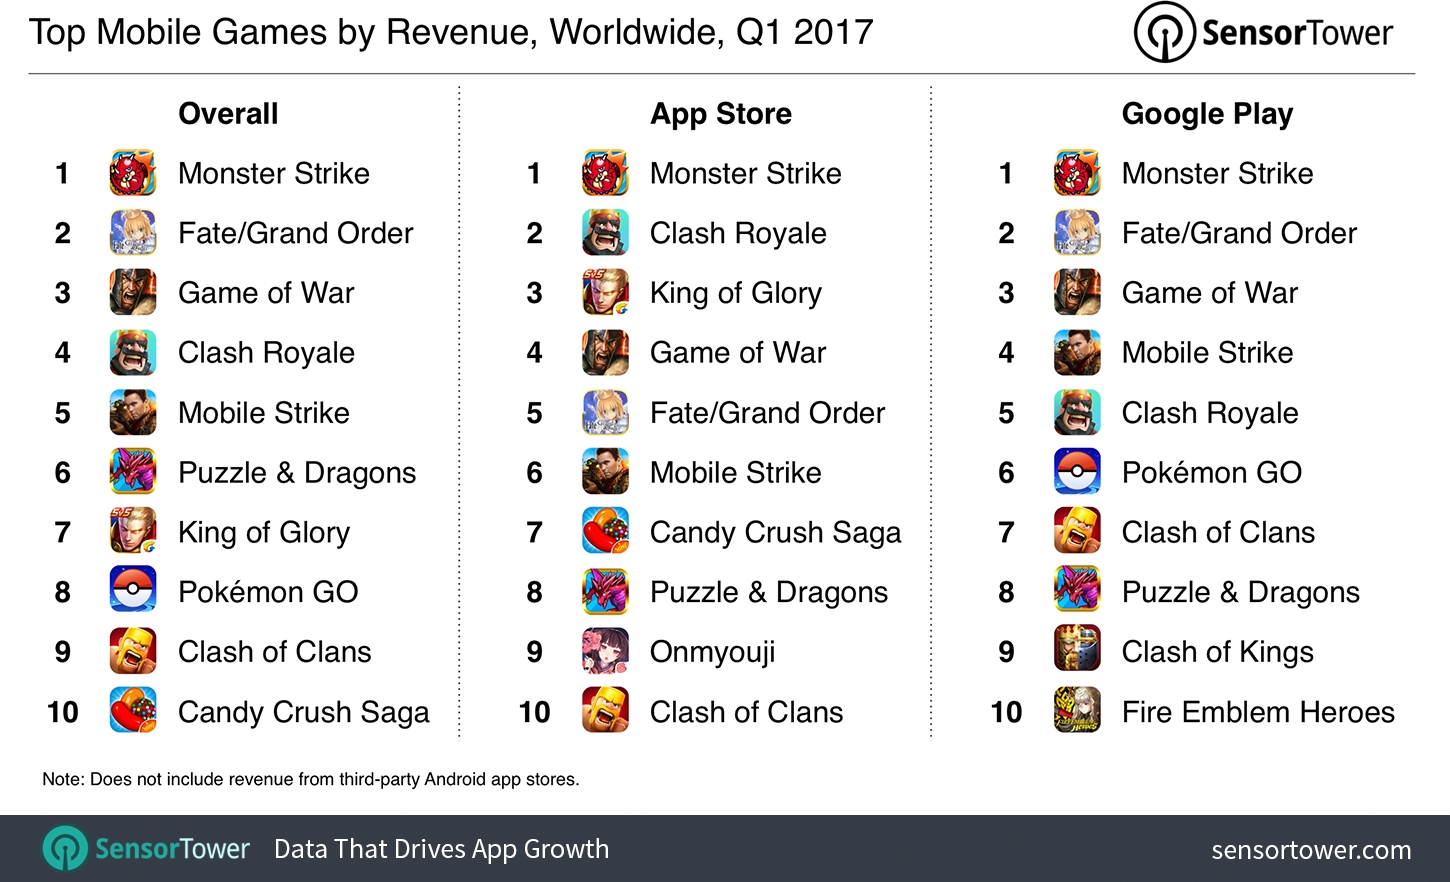 'Clash Royale' Is Second Only to 'Monster Strike' in Terms of Q1 2017 Revenue